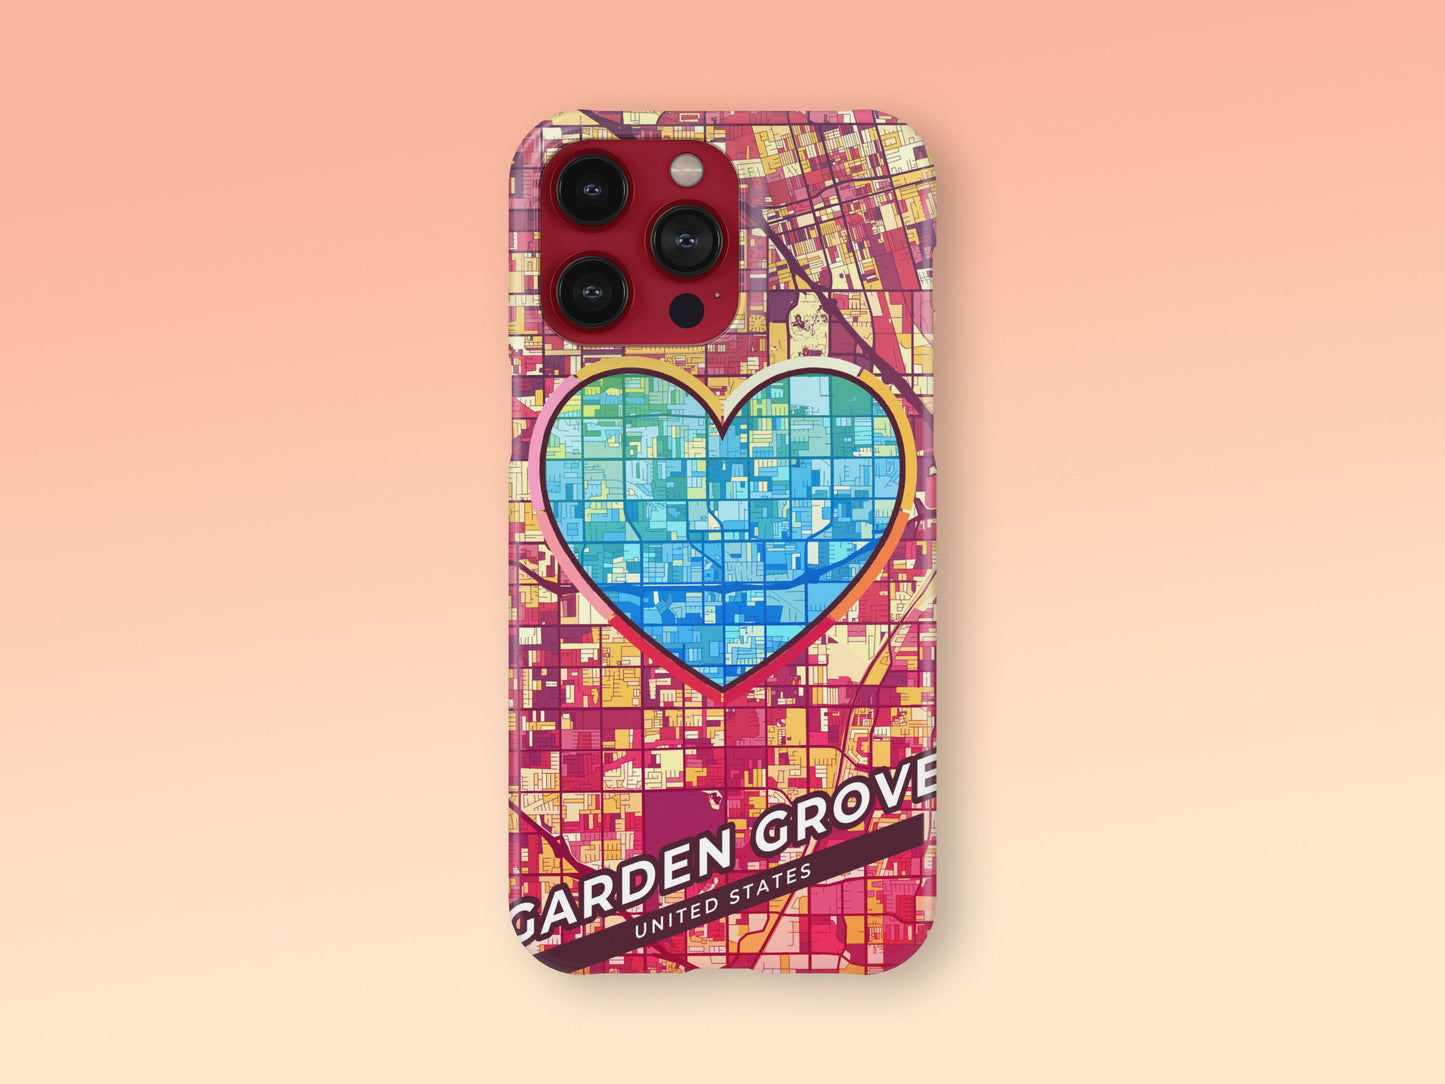 Garden Grove California slim phone case with colorful icon. Birthday, wedding or housewarming gift. Couple match cases. 2